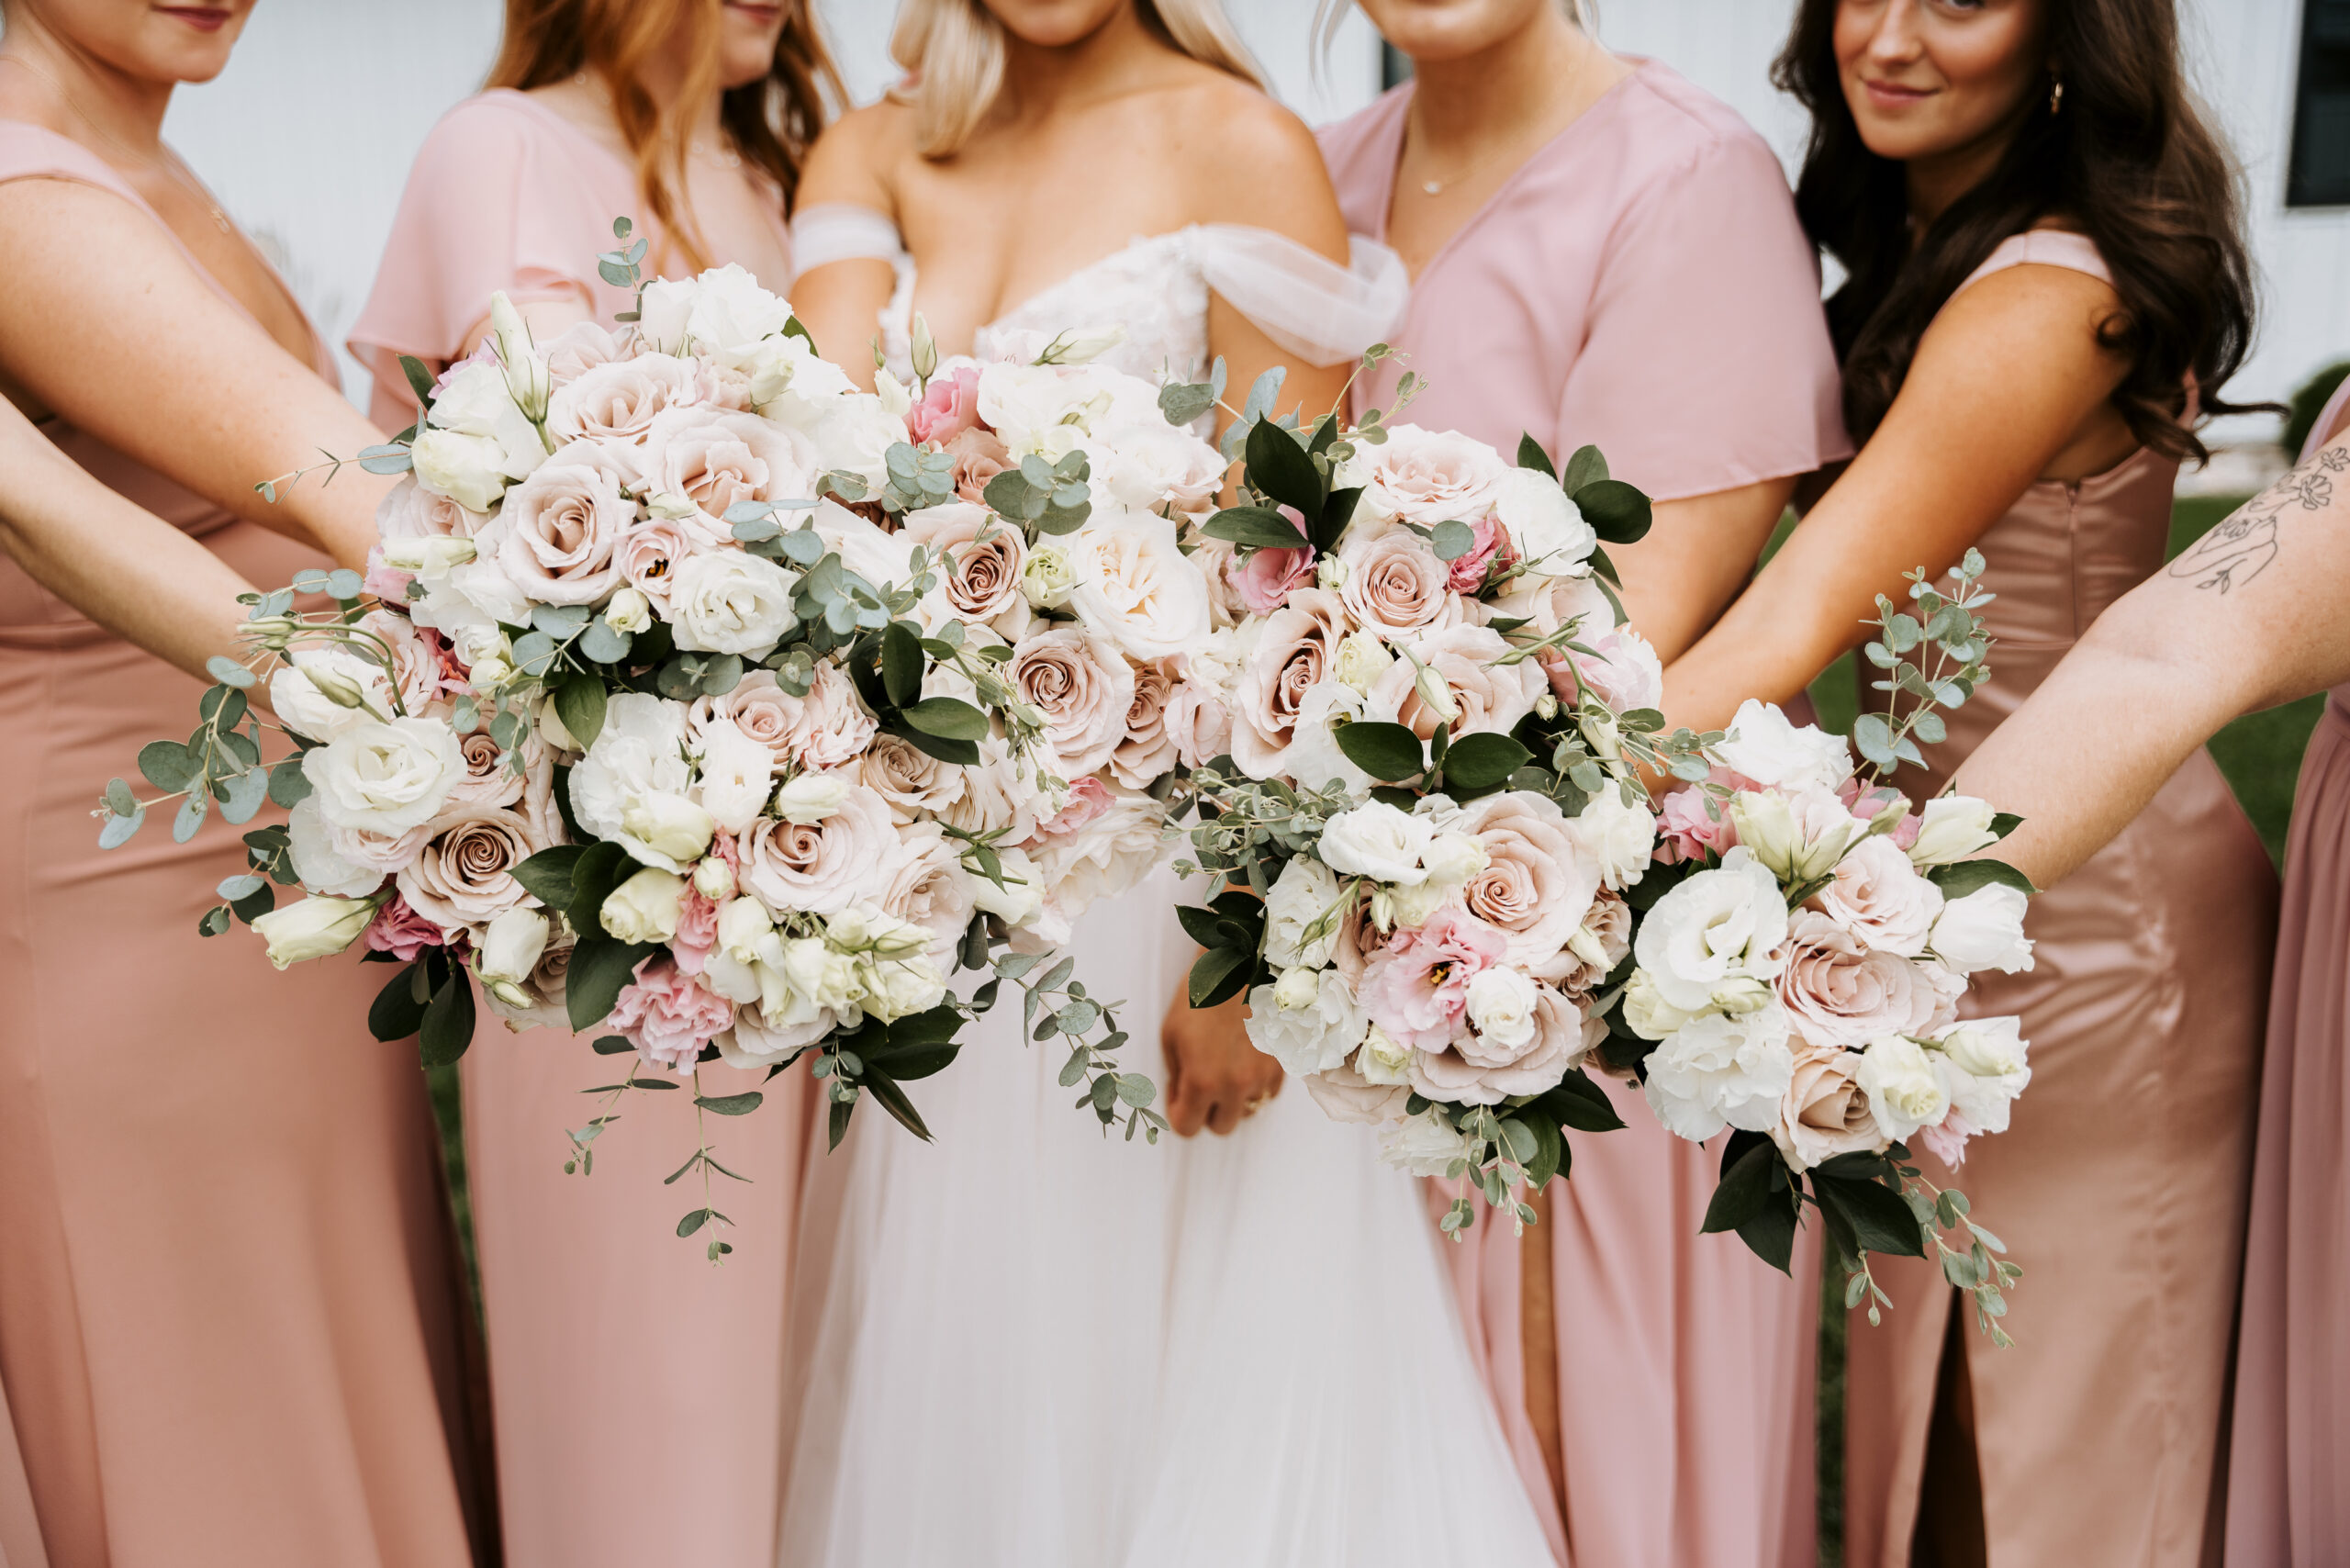 pink, white, and green wedding flower bouquets with light pink bridesmaid dresses in summer